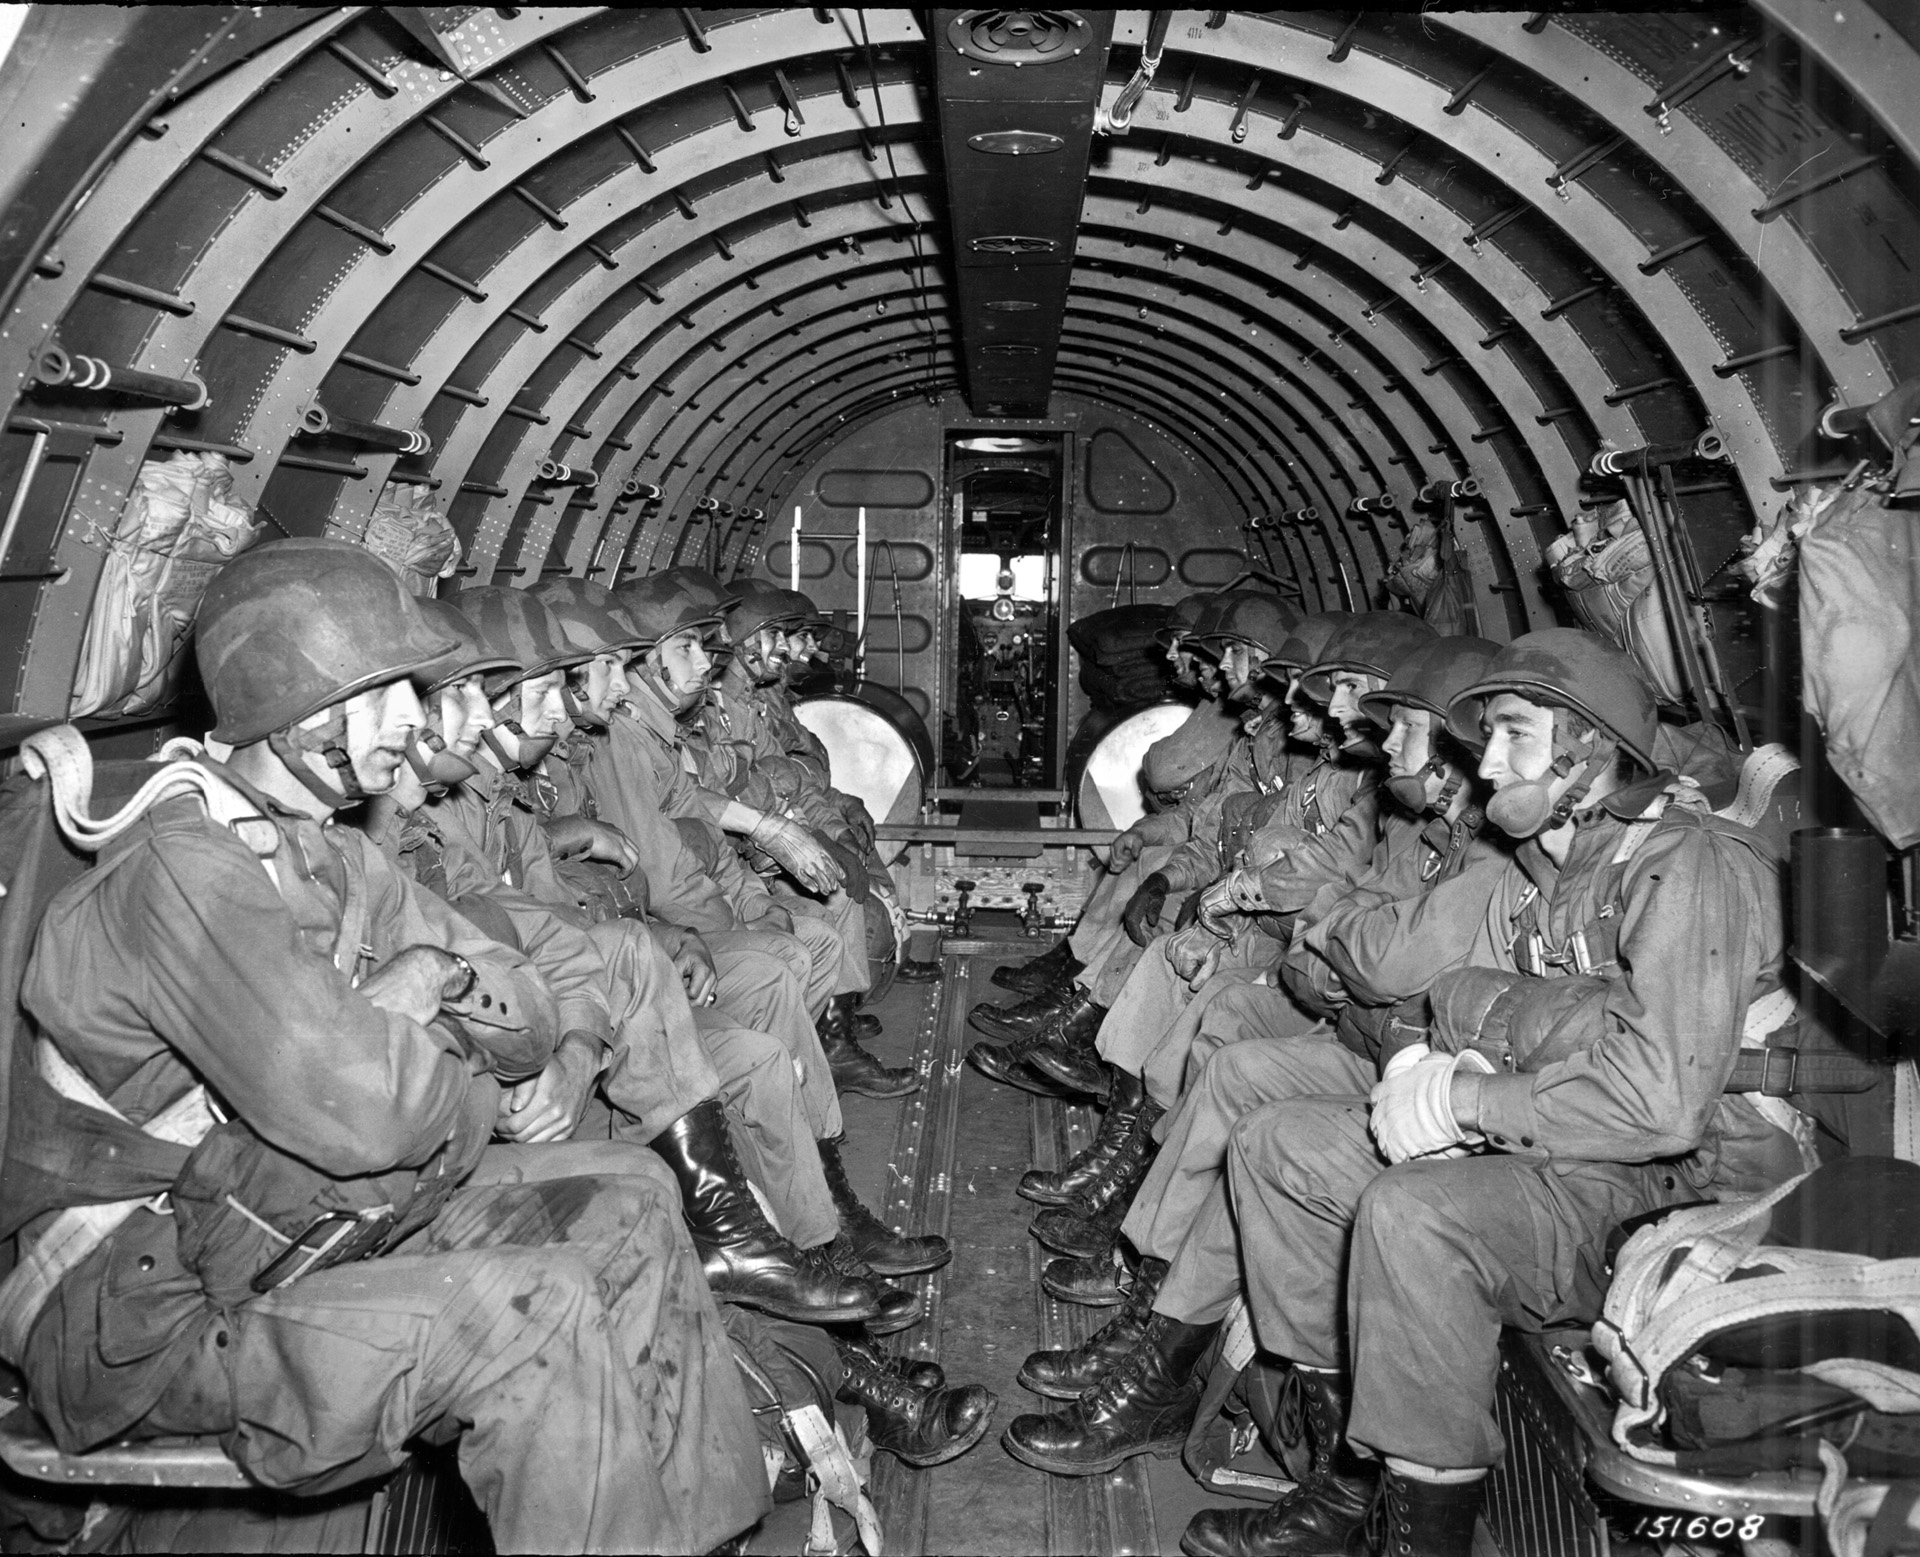 During the same training exercise from October 1942, these 509th PIR troopers sit aboard a Douglas C-47 transport aircraft and await orders to stand up, hook up, and jump. The aircraft is from the 60th Troop Carrier Group, the same unit that would carry the 509th into action in North Africa.